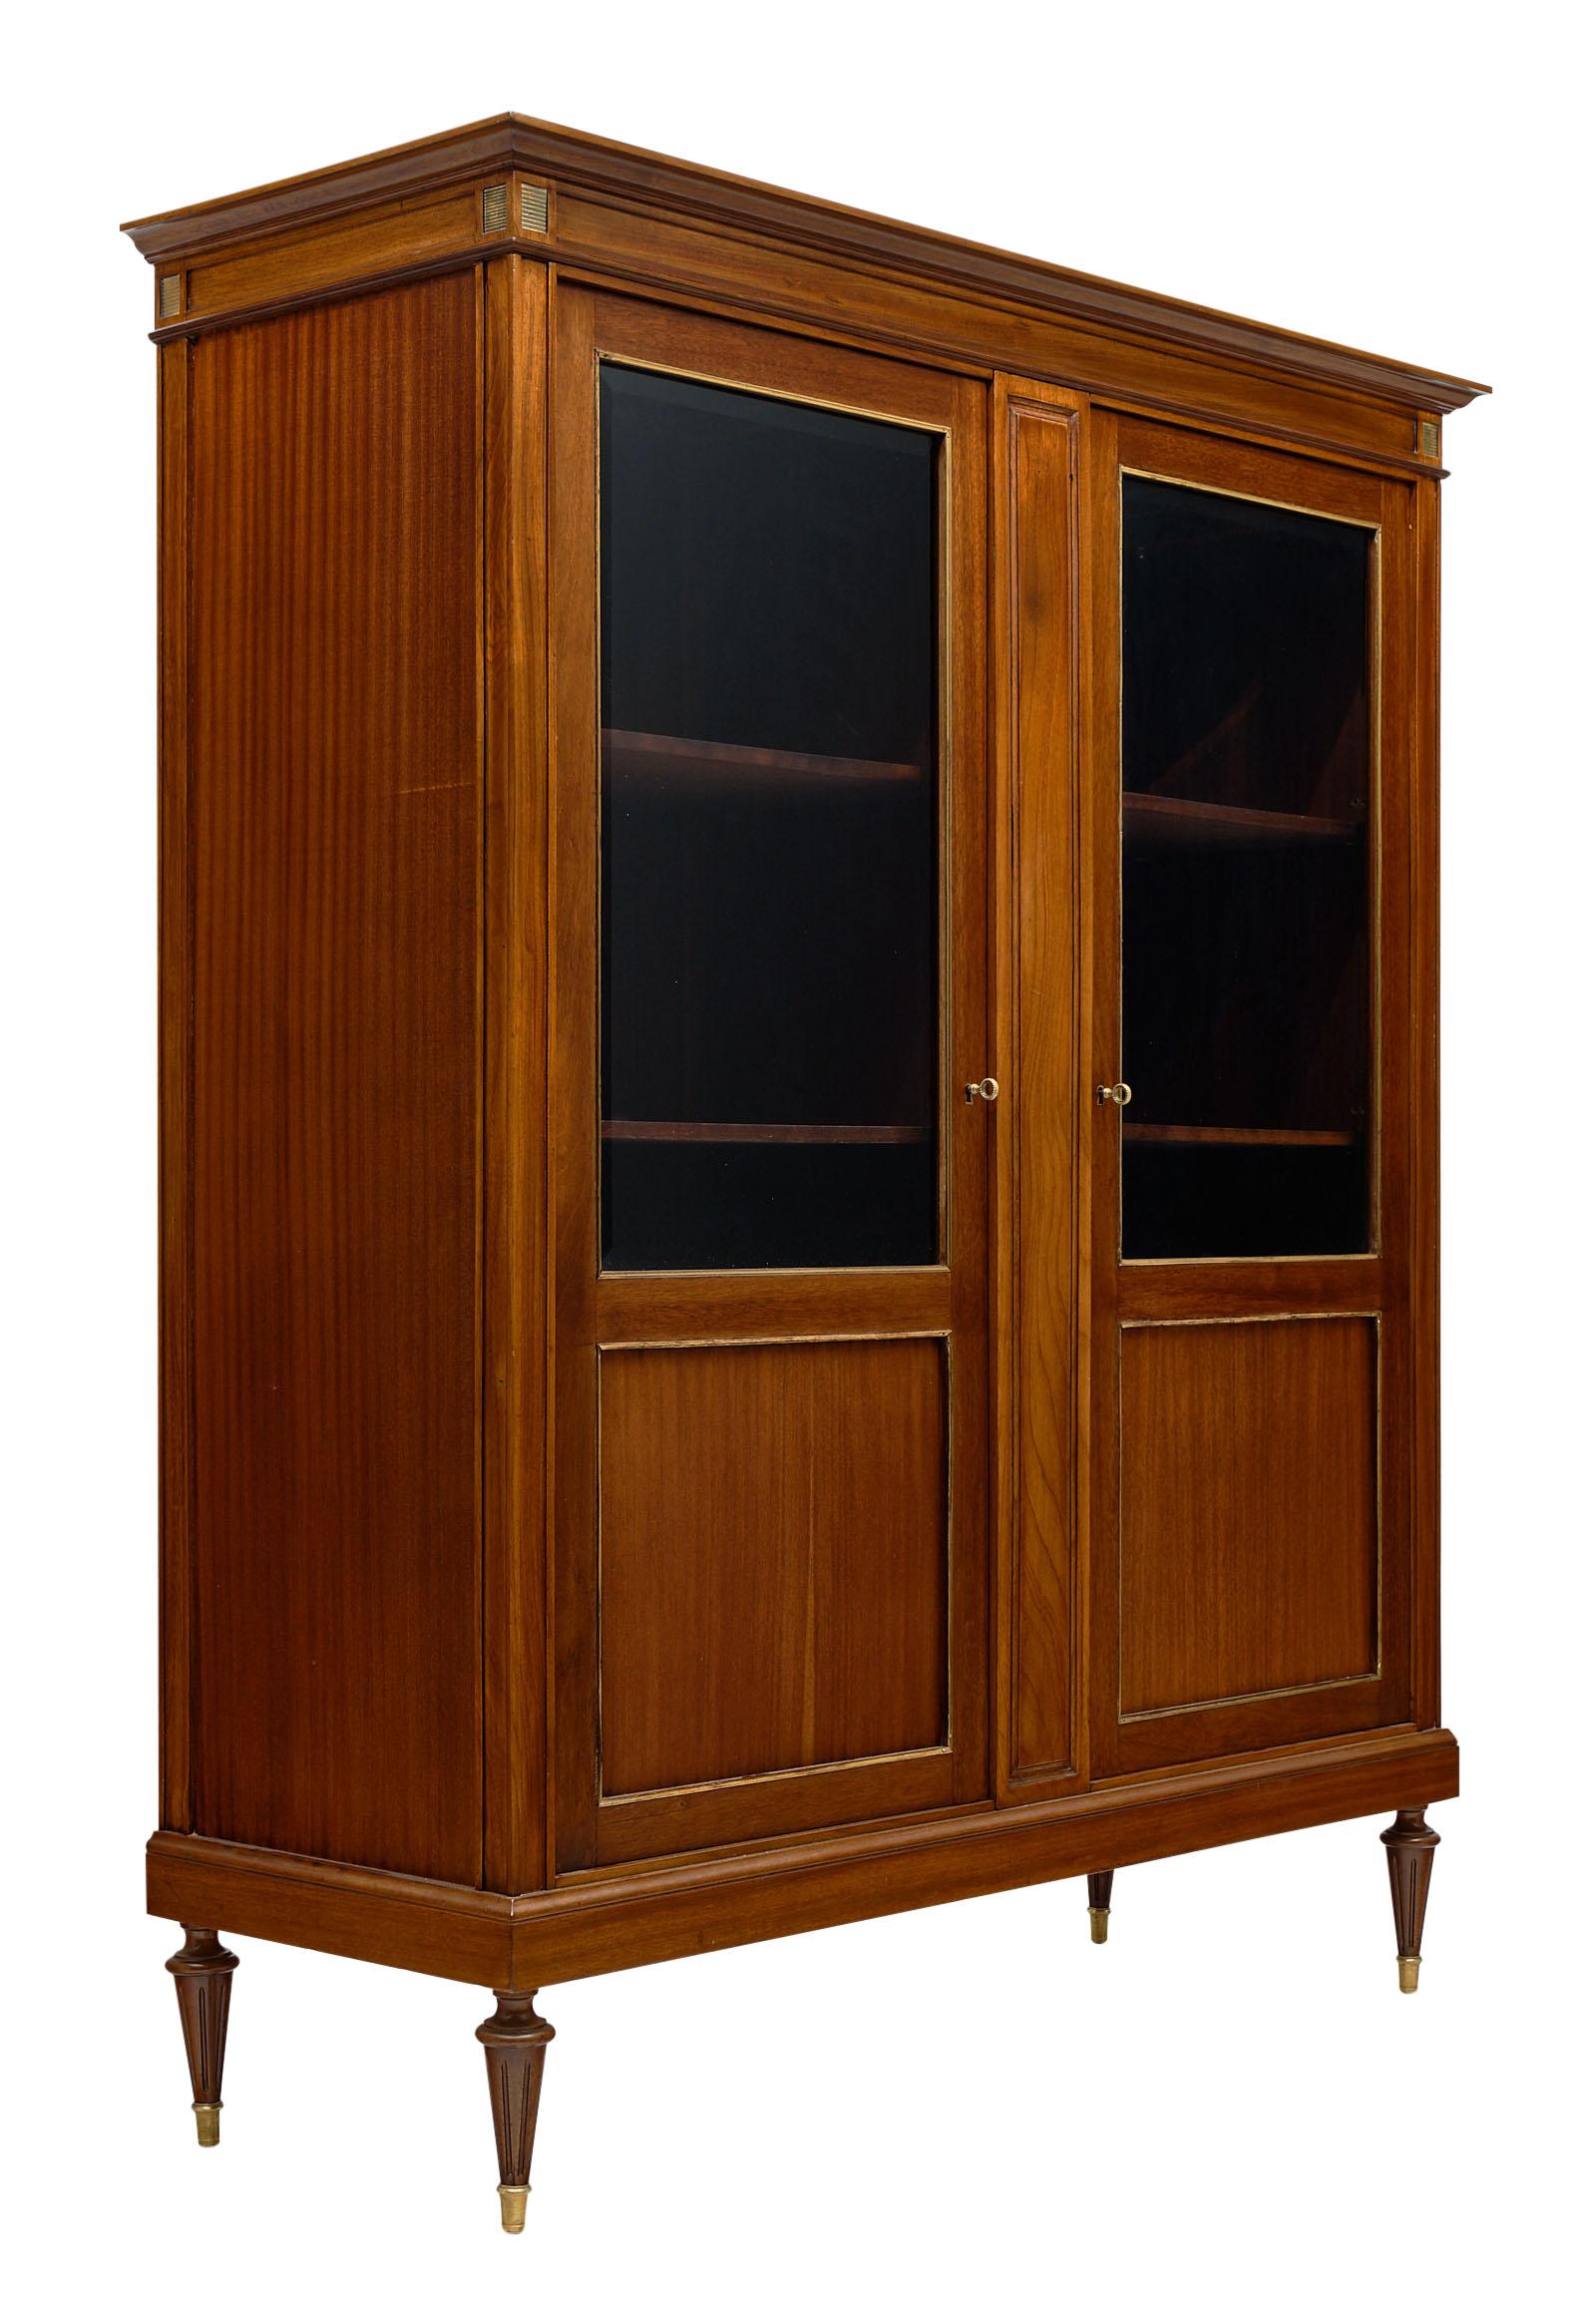 Louis XVI style French mahogany bookcase with wonderful brass trim throughout and interior shelving to house your priceless collectables or book collection. We love the warmth of the mahogany and the strong; Classic details and proportions.